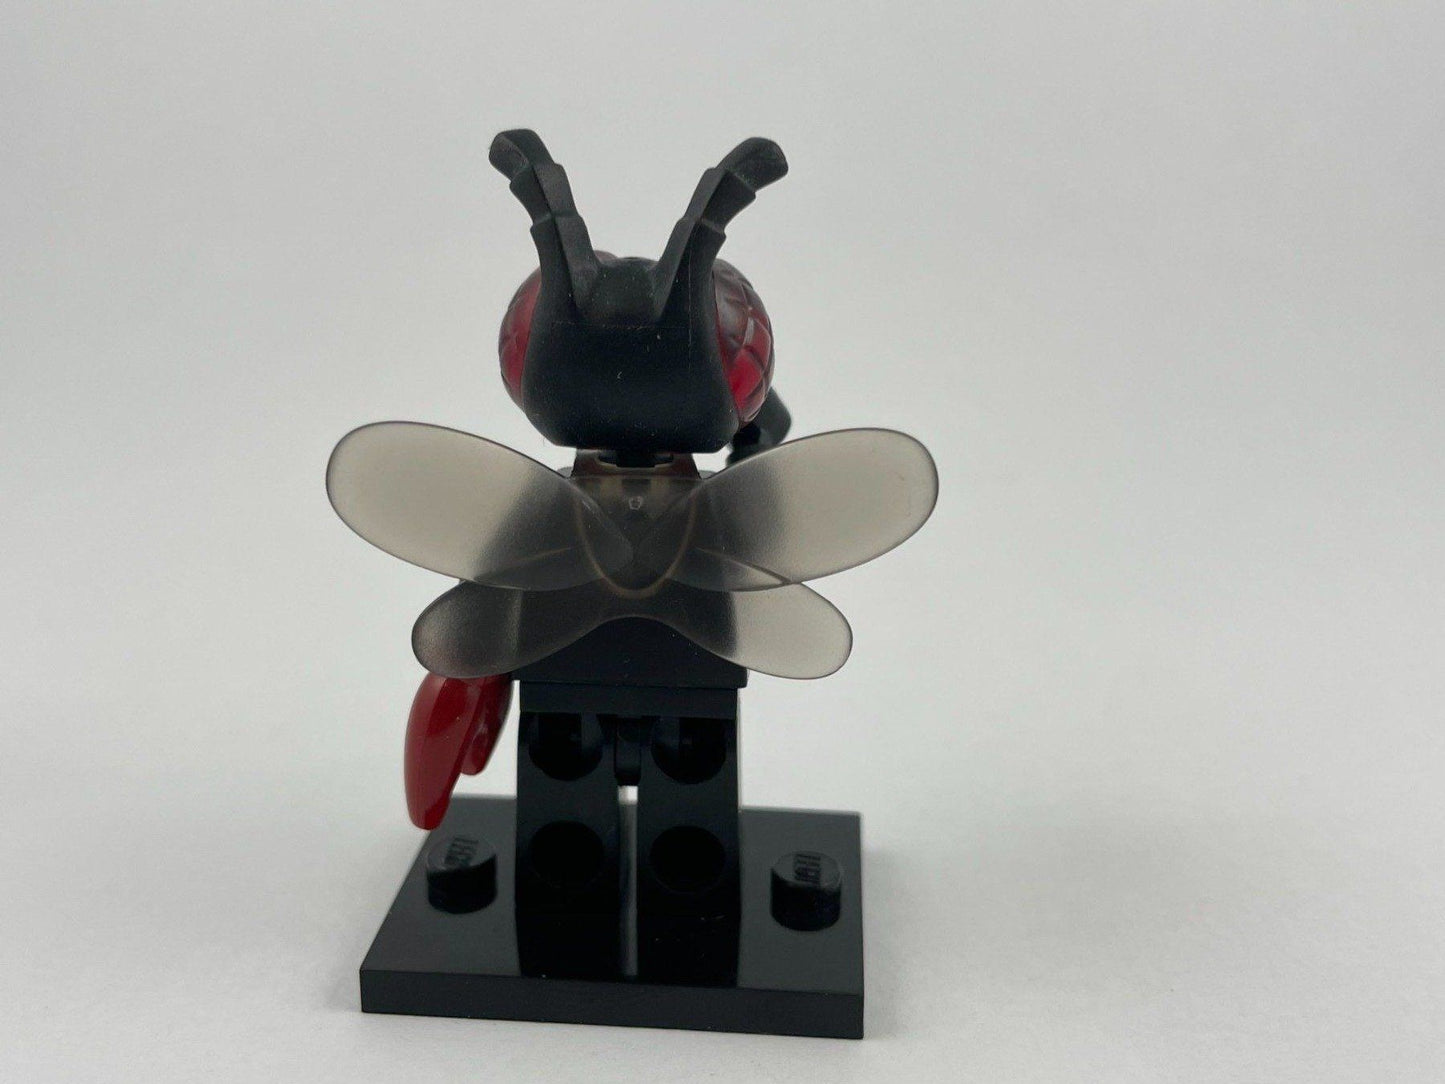 LEGO Series 14 Collectable Minifigur Fly Monster